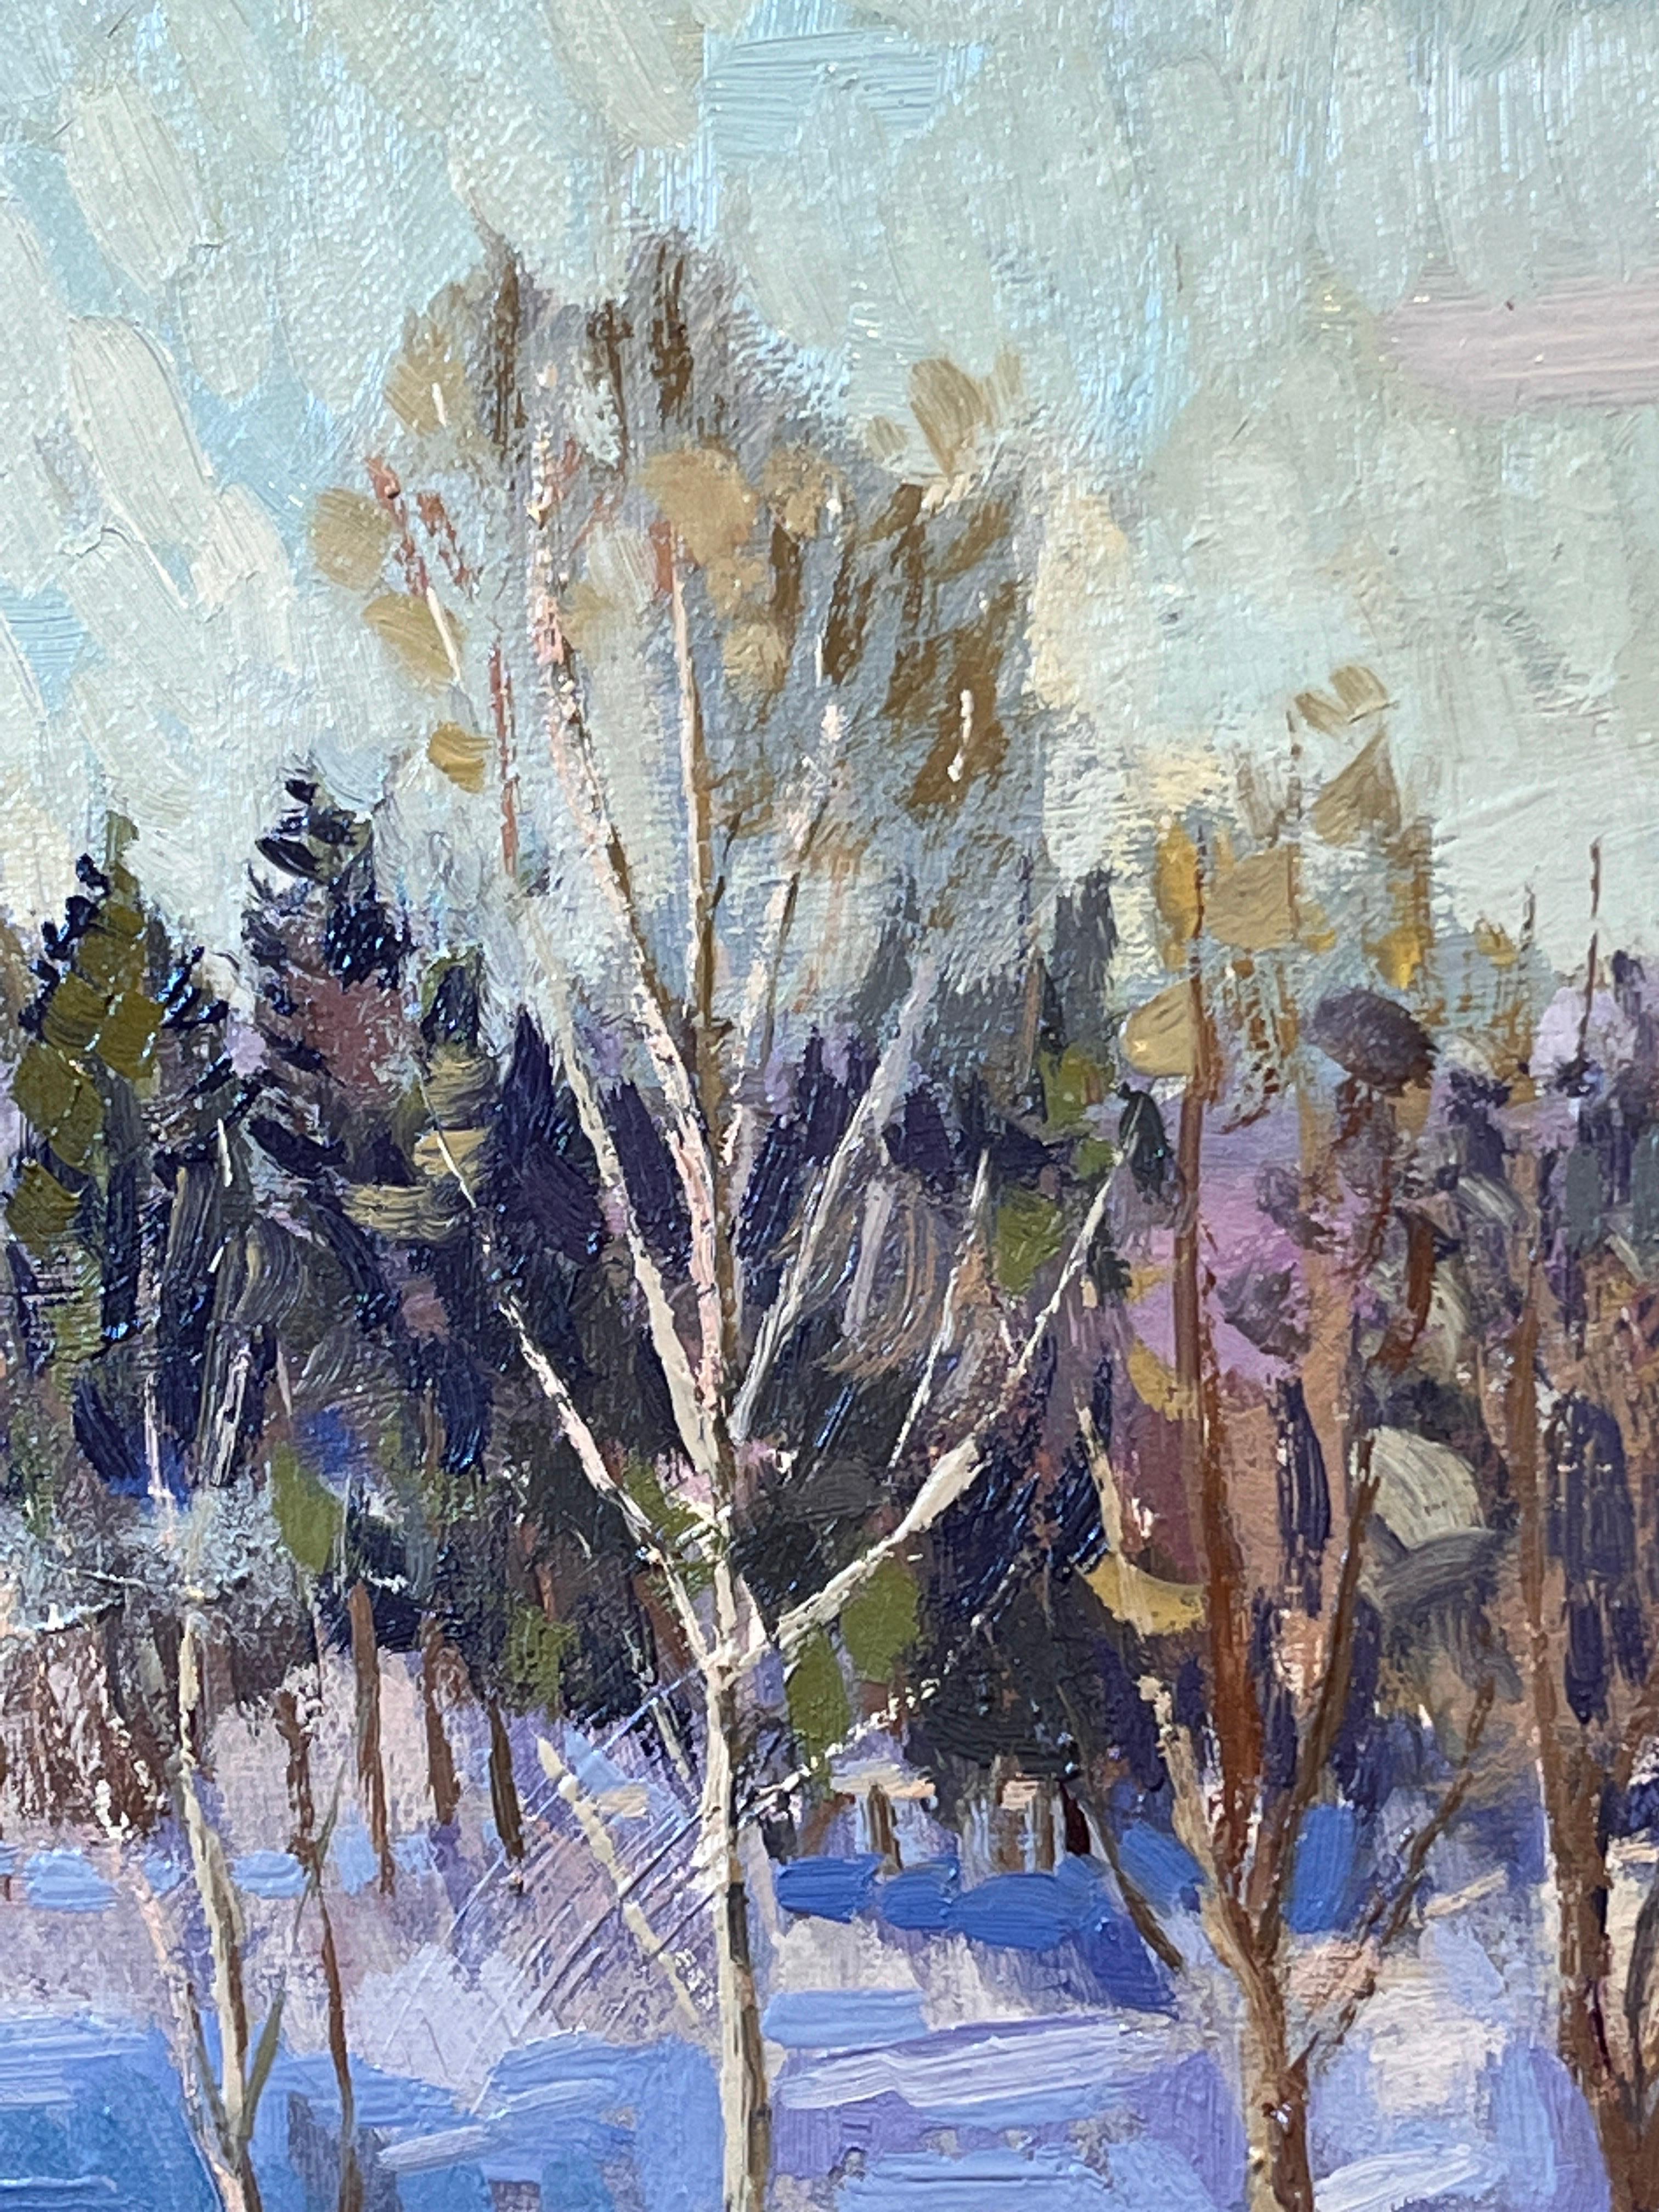 Winter Rhythms is an original oil painting by American Artist Leo Mancini-Hresko. Hresko paints en plein air all over the world. This piece was done in his native New England and shows the bright light and color observed on a winter's day. Framed in